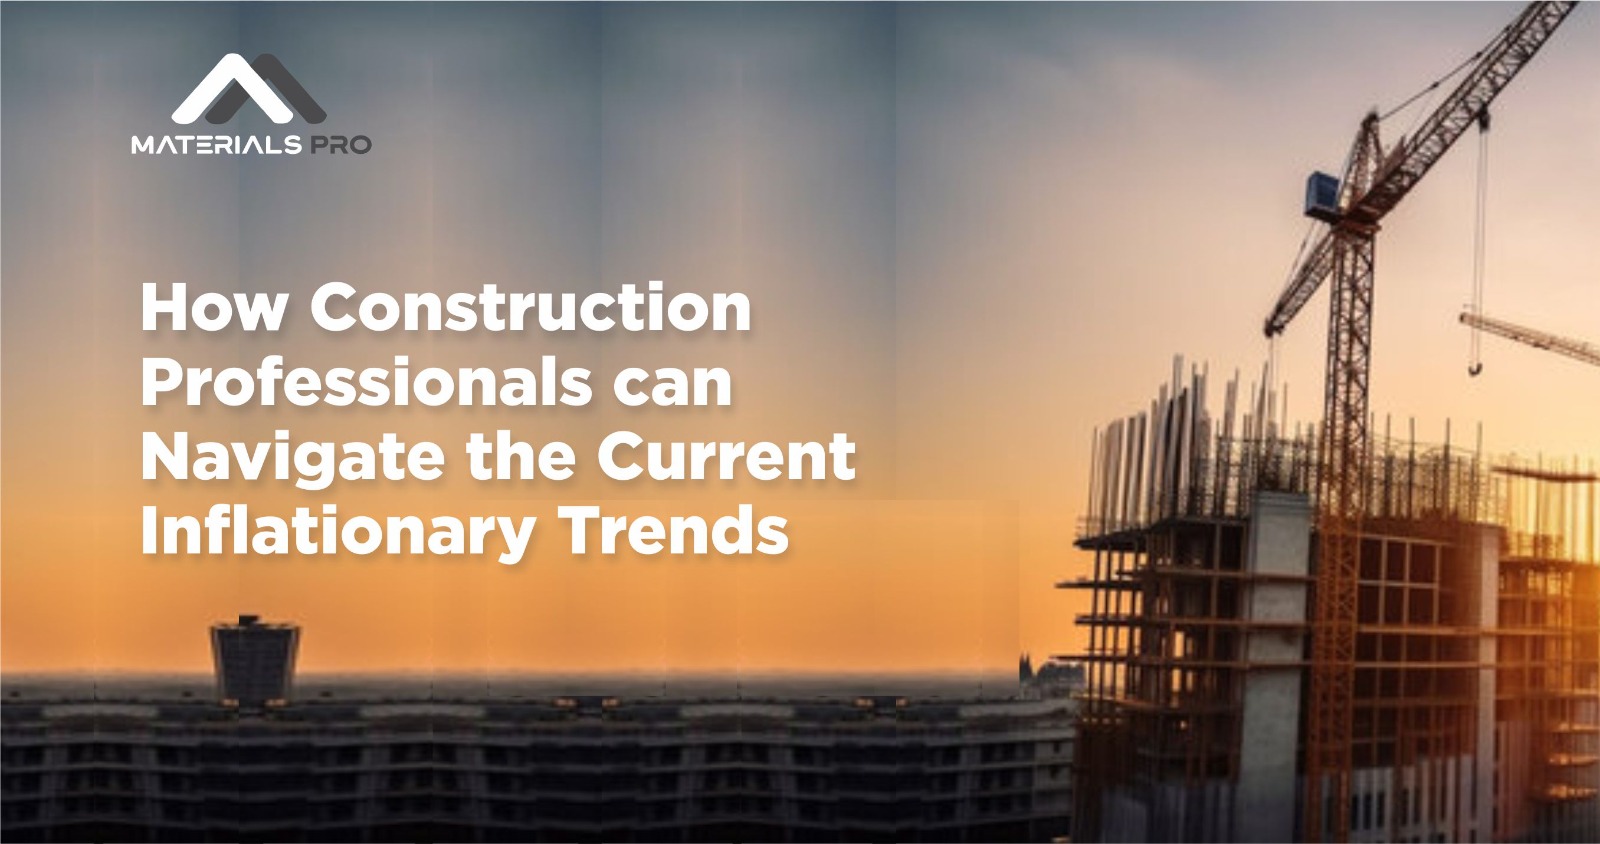 How Construction Professionals can Navigate the Current Inflationary Trends